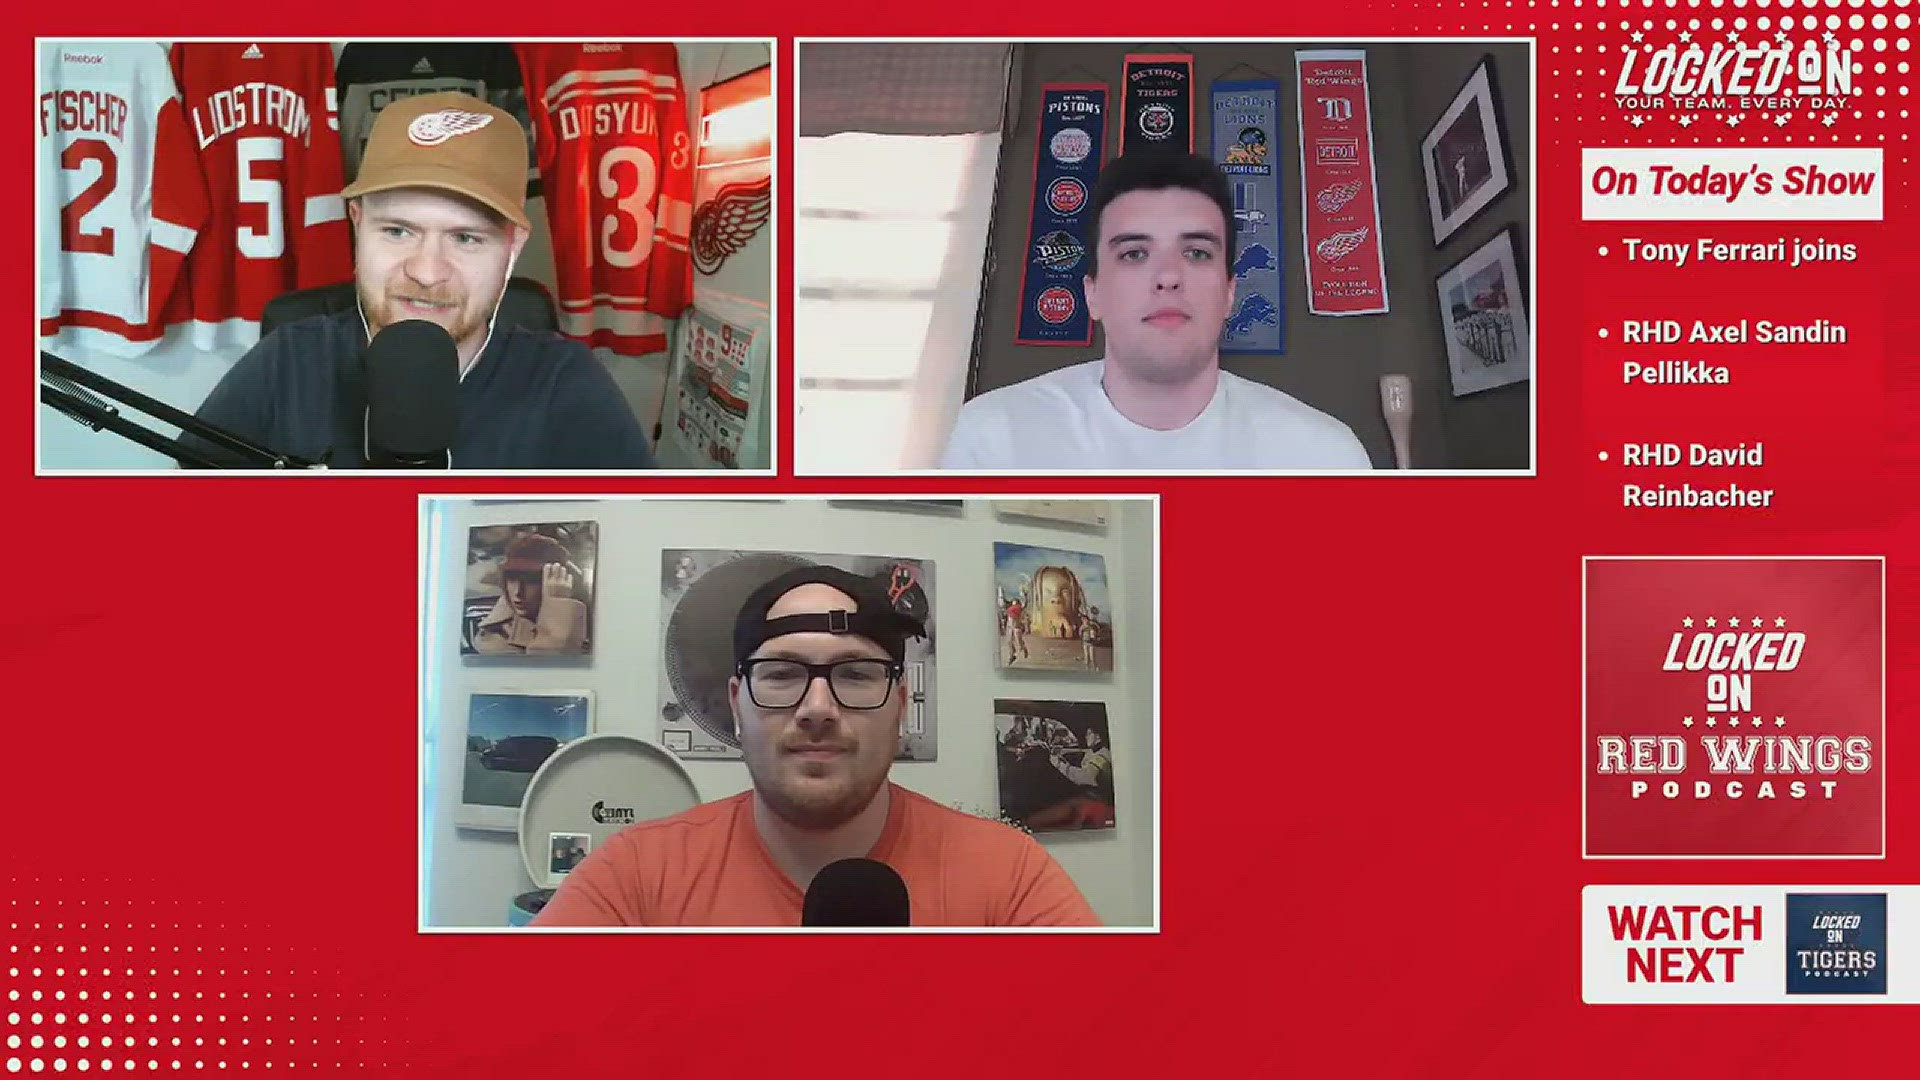 Tony Ferrari joins us to talk about two of the top RD in the draft class, Axel Sandin Pellikka and David Reinbacher.